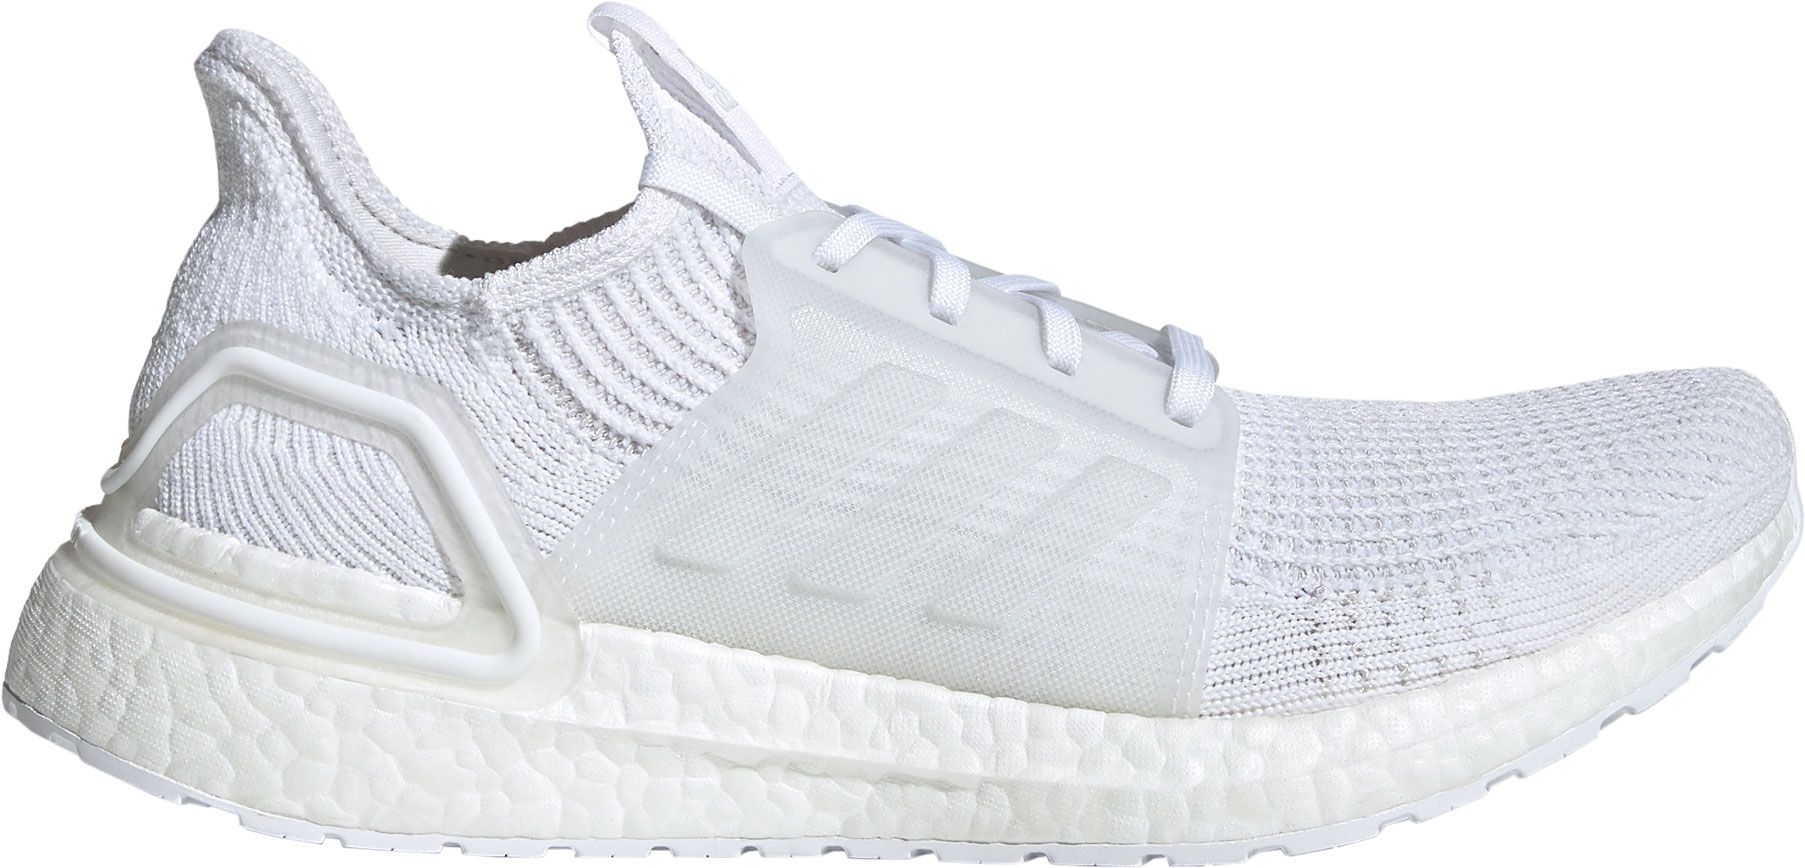 adidas Ultra Boost 4.0 White Red Black G28999 Release Info